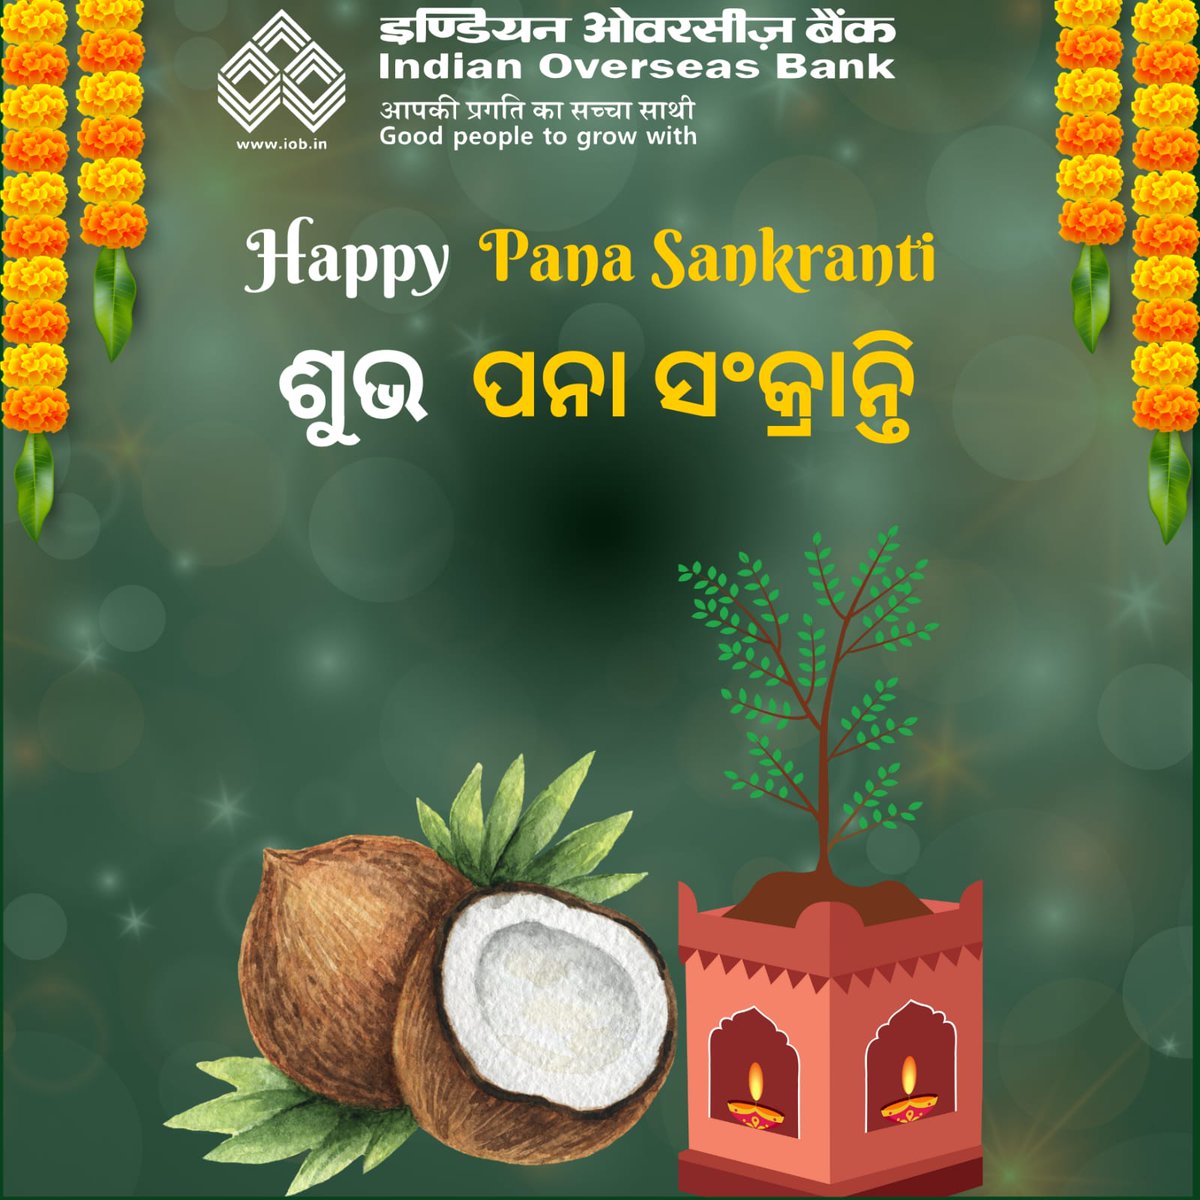 'Stepping into the Odia New Year with sweet Pana and brighter hopes!'
#iob #rbi #dfs #goodpeopletogrowwith #panasankranti #odianewyear